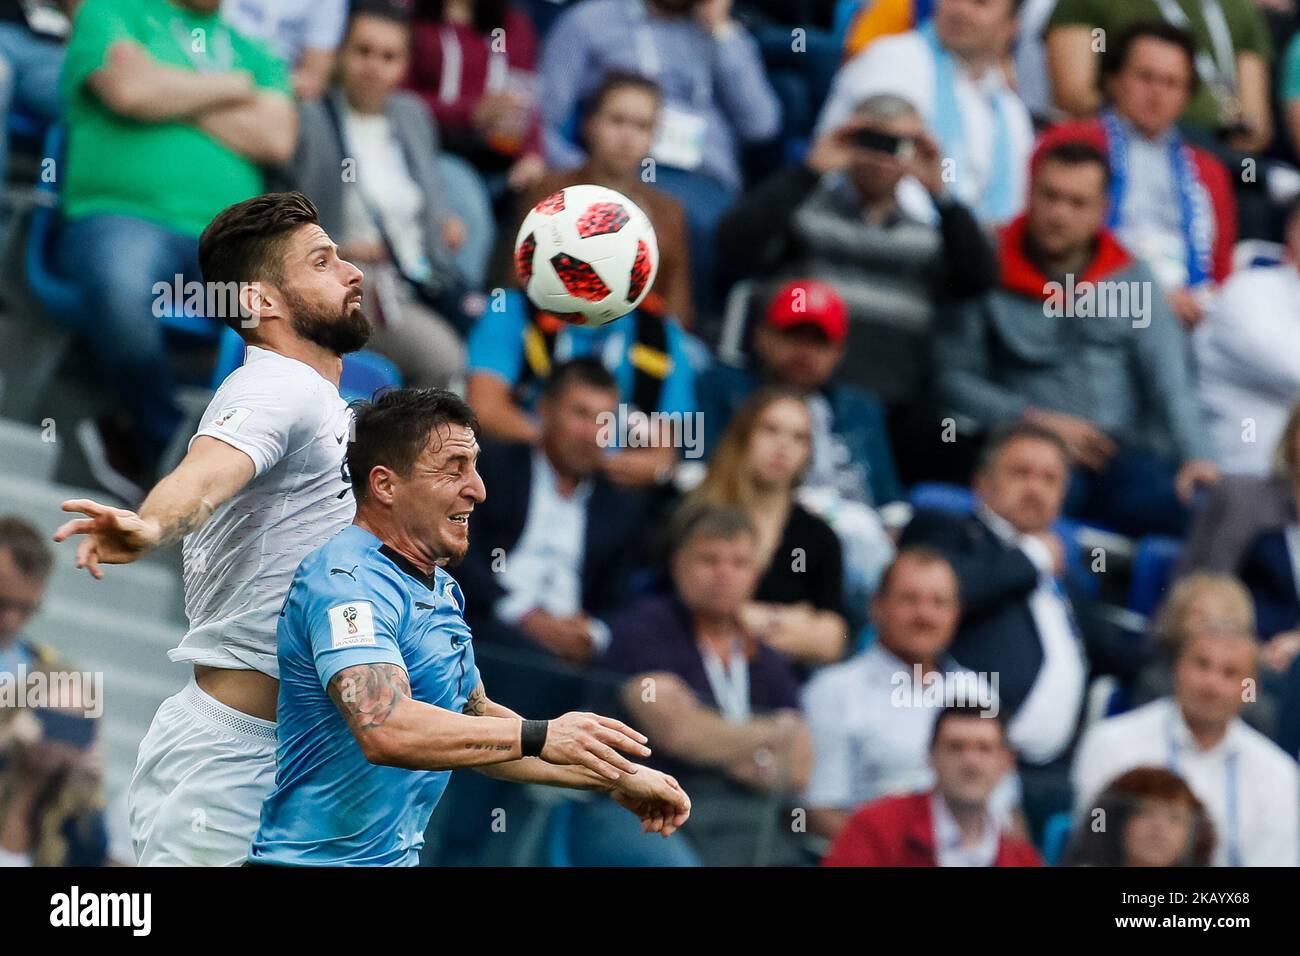 Cristian Rodriguez (R) of Uruguay national team and Olivier Giroud of France national team vie for a header during the 2018 FIFA World Cup Russia Quarter Final match between Uruguay and France on July 6, 2018 at Nizhny Novgorod Stadium in Nizhny Novgorod, Russia. (Photo by Mike Kireev/NurPhoto) Stock Photo